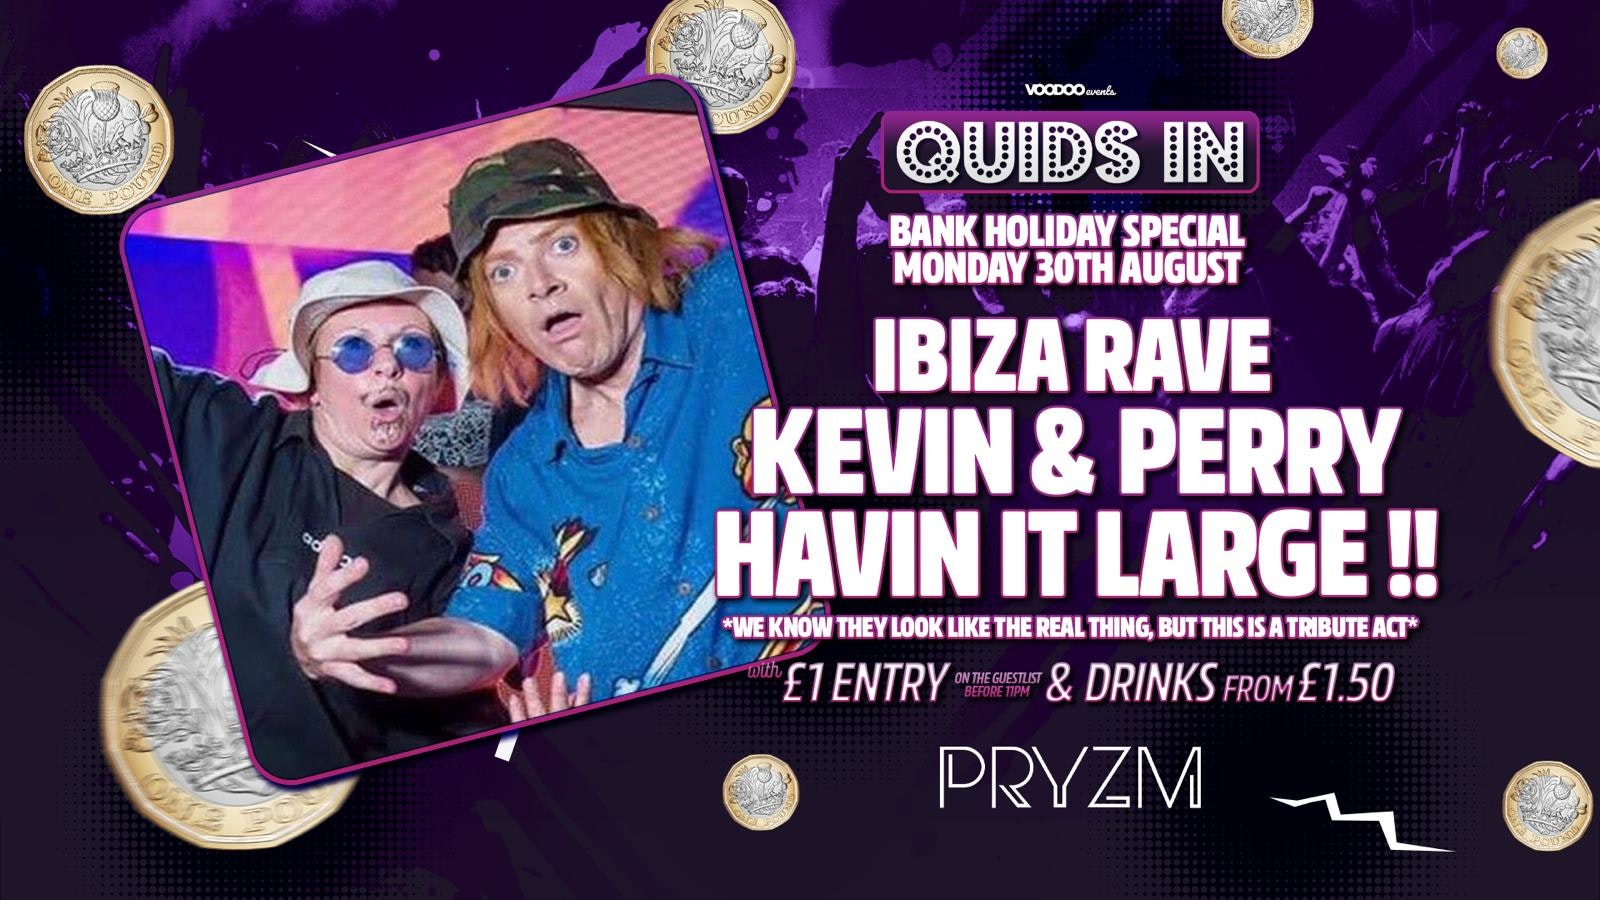 Quids In Goes LARGE!!! with Kevin and Perry at PRYZM – 30th August